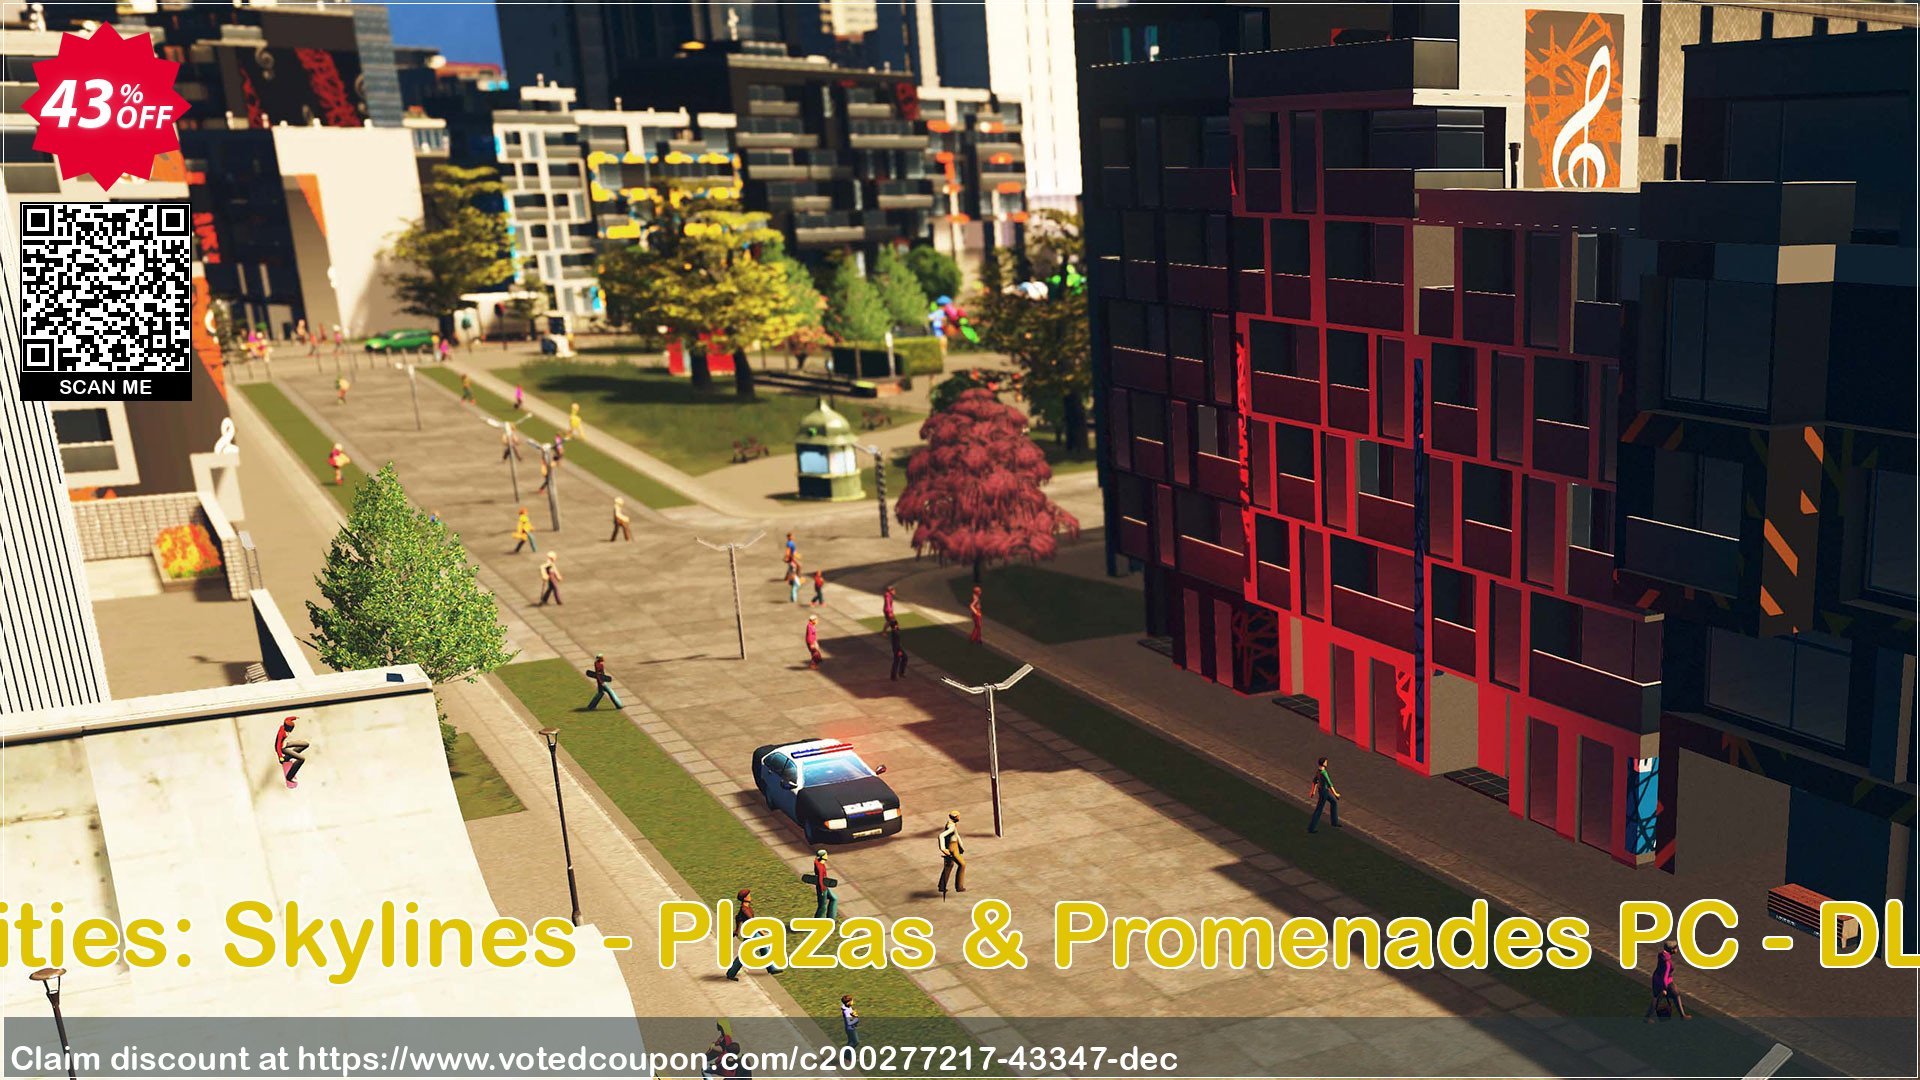 Cities: Skylines - Plazas & Promenades PC - DLC Coupon Code May 2024, 43% OFF - VotedCoupon